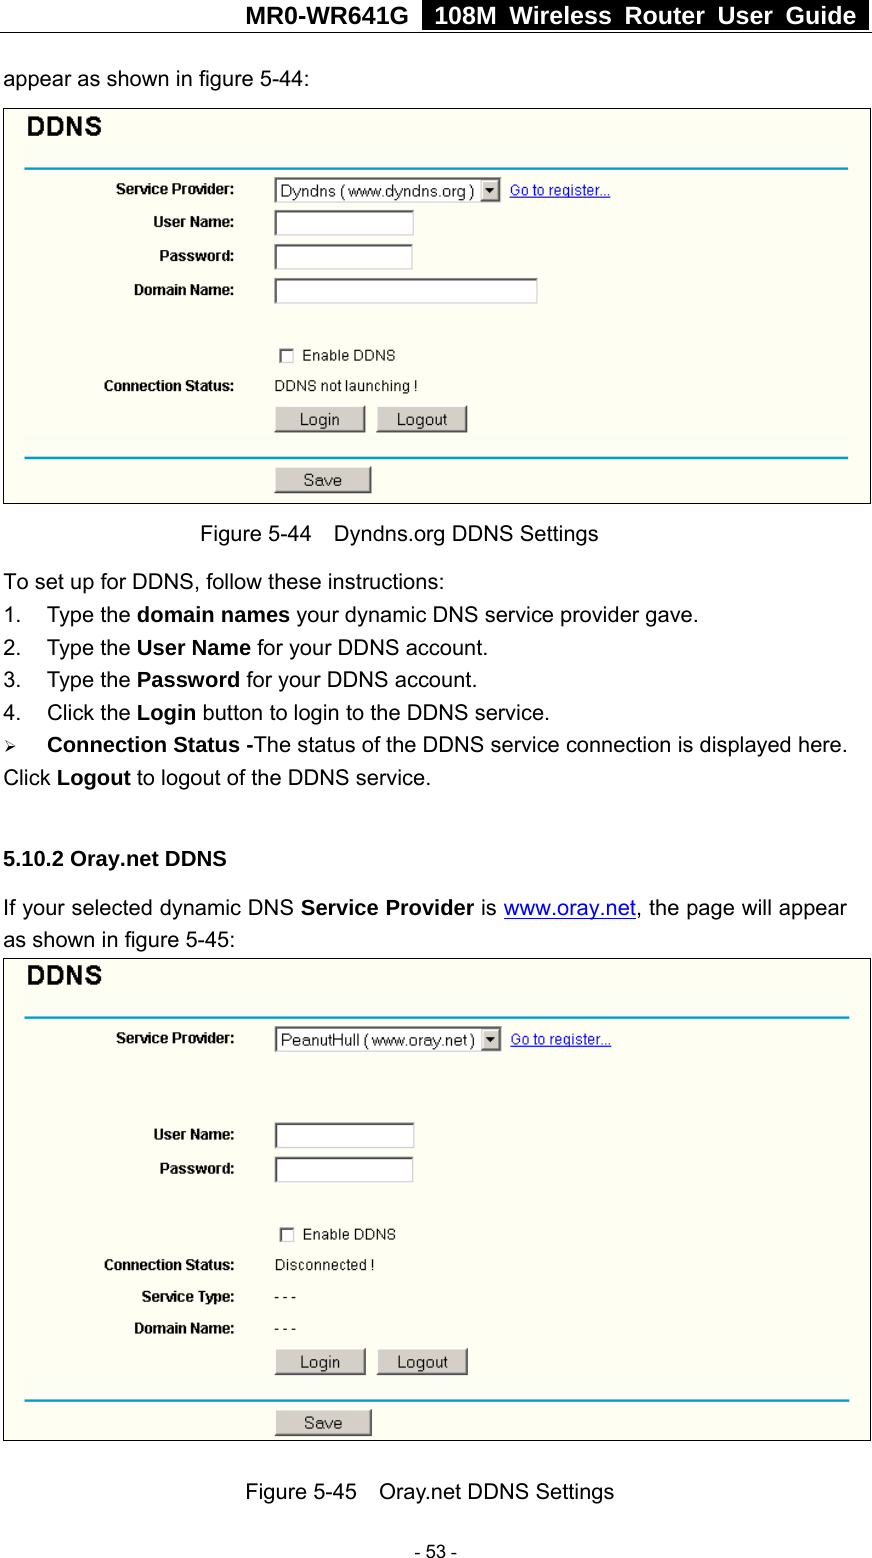 MR0-WR641G   108M Wireless Router User Guide  appear as shown in figure 5-44:  Figure 5-44    Dyndns.org DDNS Settings To set up for DDNS, follow these instructions: 1. Type the domain names your dynamic DNS service provider gave.   2. Type the User Name for your DDNS account.   3. Type the Password for your DDNS account.   4. Click the Login button to login to the DDNS service. ¾ Connection Status -The status of the DDNS service connection is displayed here. Click Logout to logout of the DDNS service.  5.10.2 Oray.net DDNS If your selected dynamic DNS Service Provider is www.oray.net, the page will appear as shown in figure 5-45:   Figure 5-45    Oray.net DDNS Settings  - 53 - 